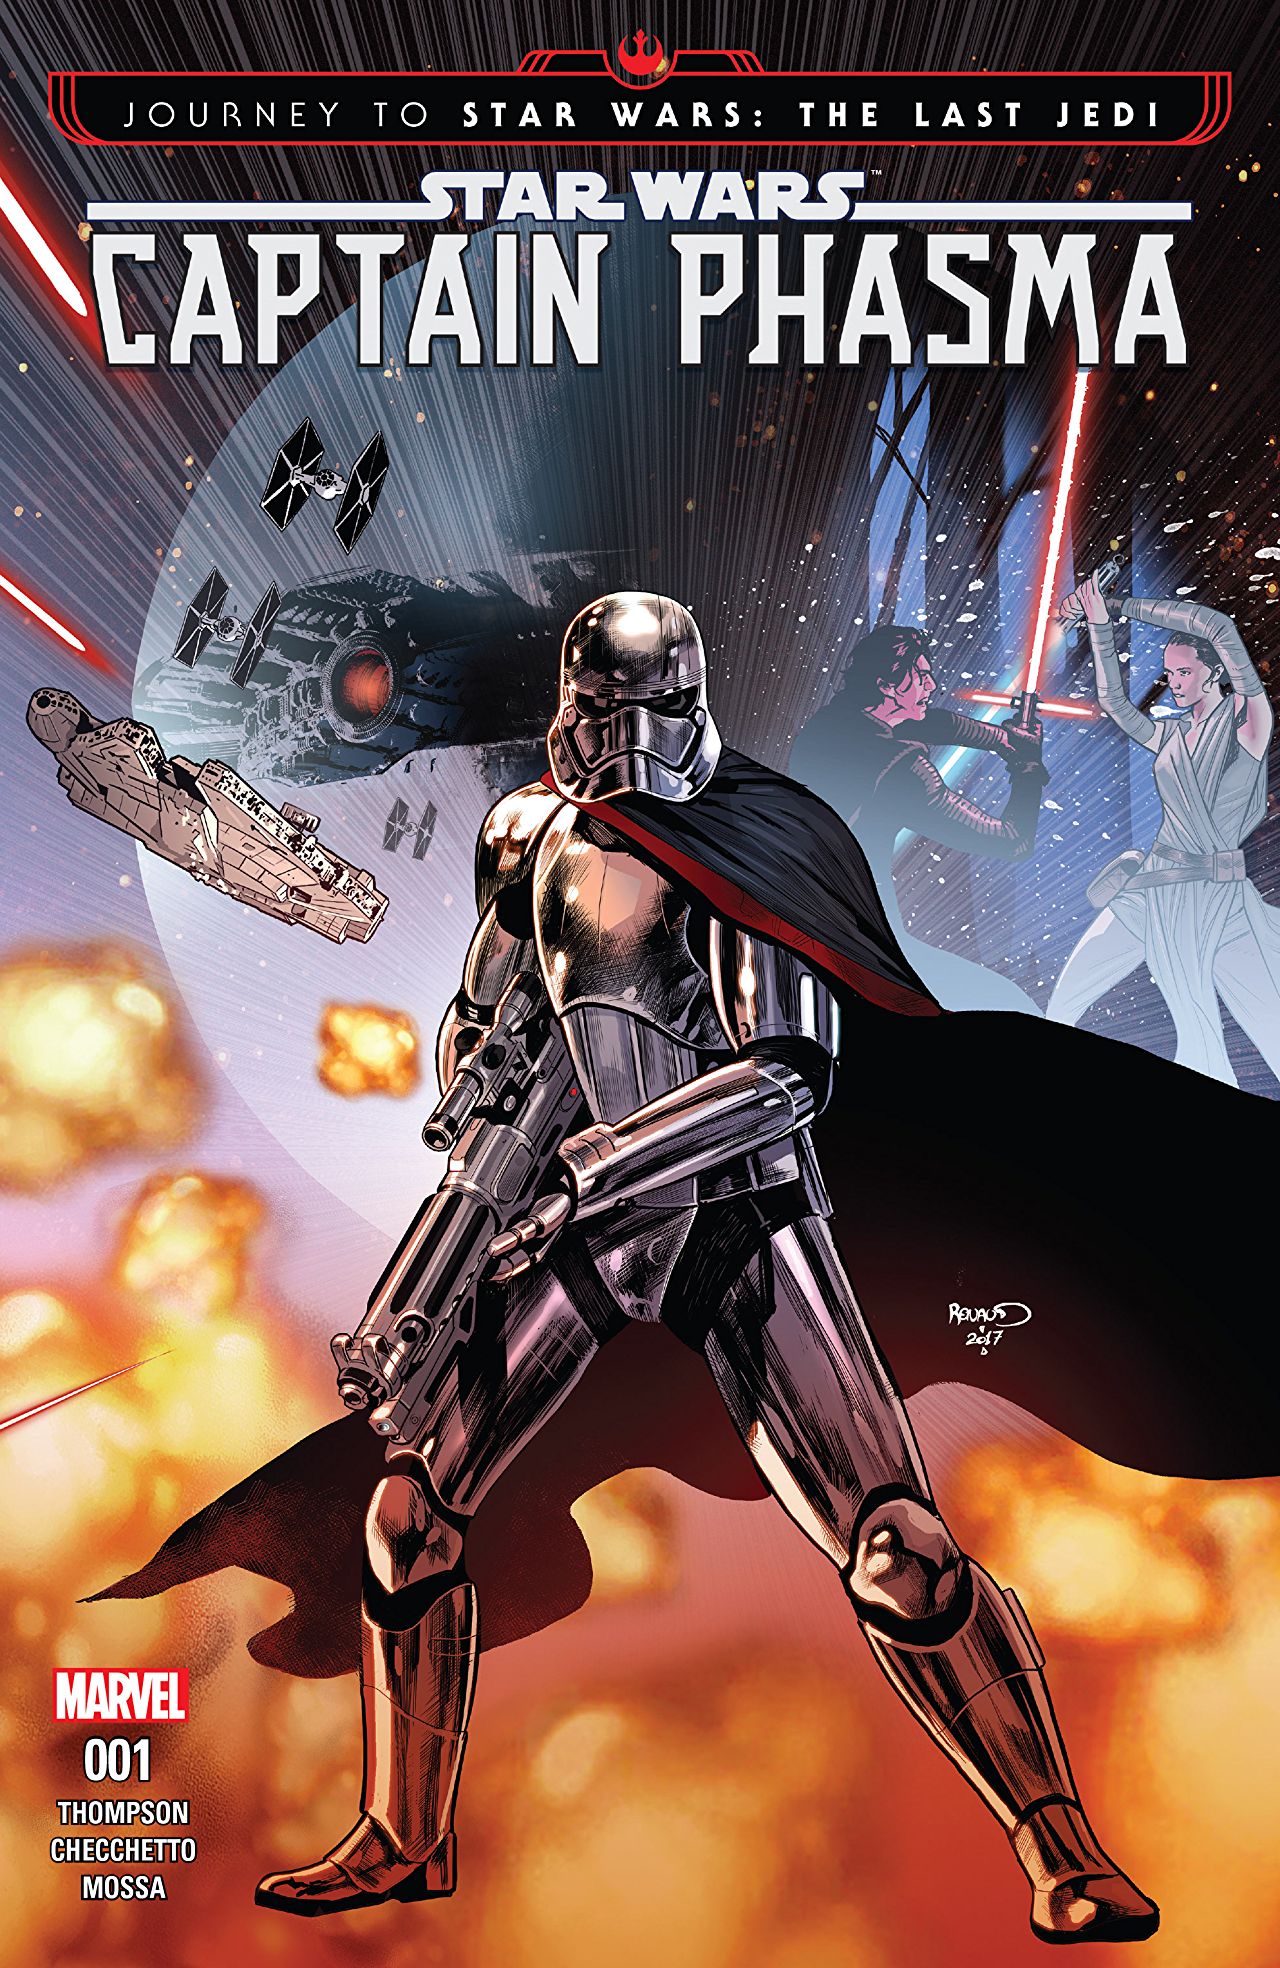 'Star Wars: Captain Phasma' Vol. 1 is some much needed exploration into an enigmatic character